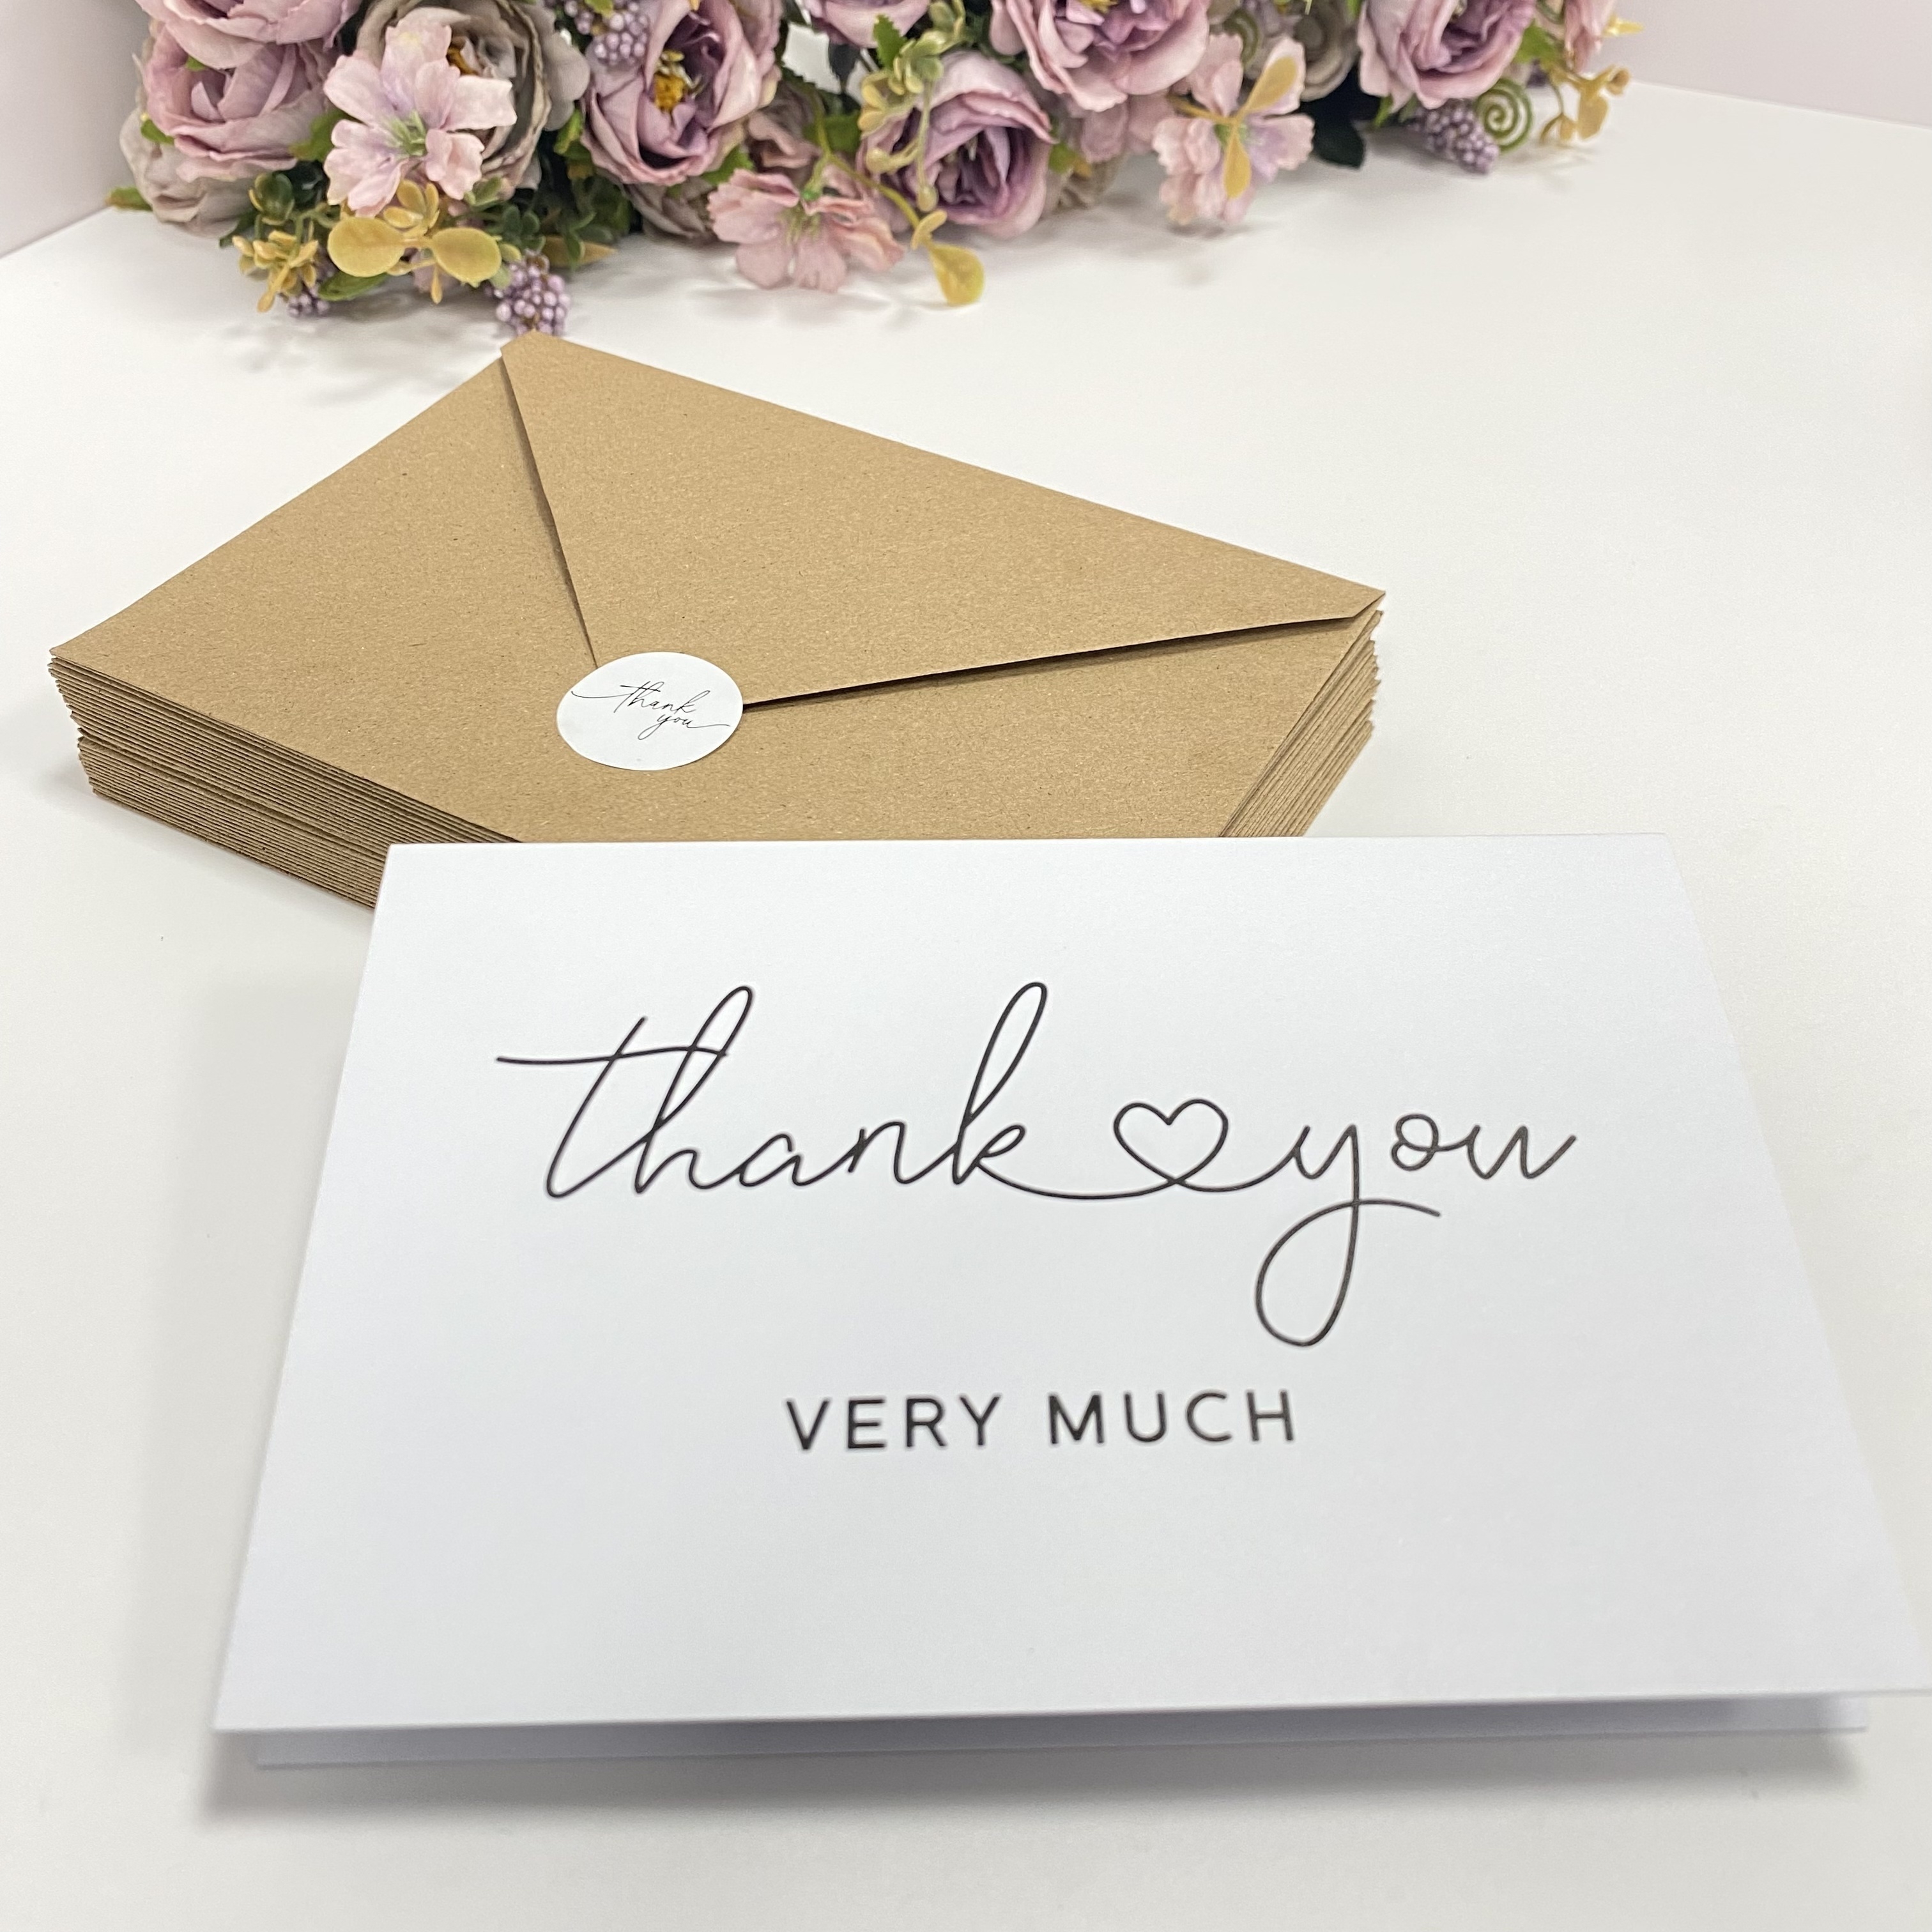 24pcs Thank You Cards with Envelopes,4x6 Thank You Cards Small Business Blank,I - Navy & Gold